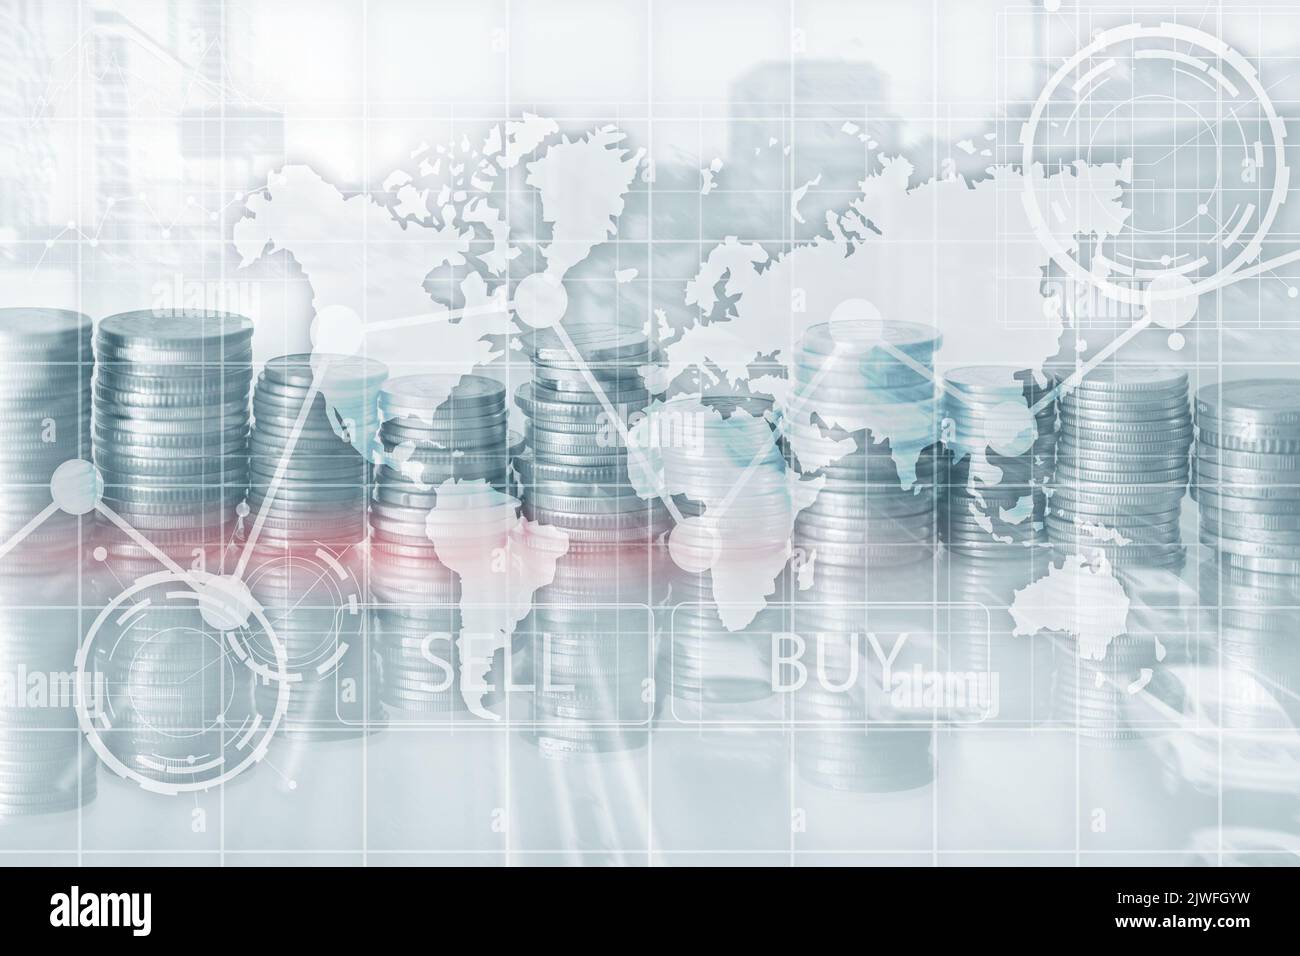 Sell and Buy concept on the background of the world map. Stock Photo